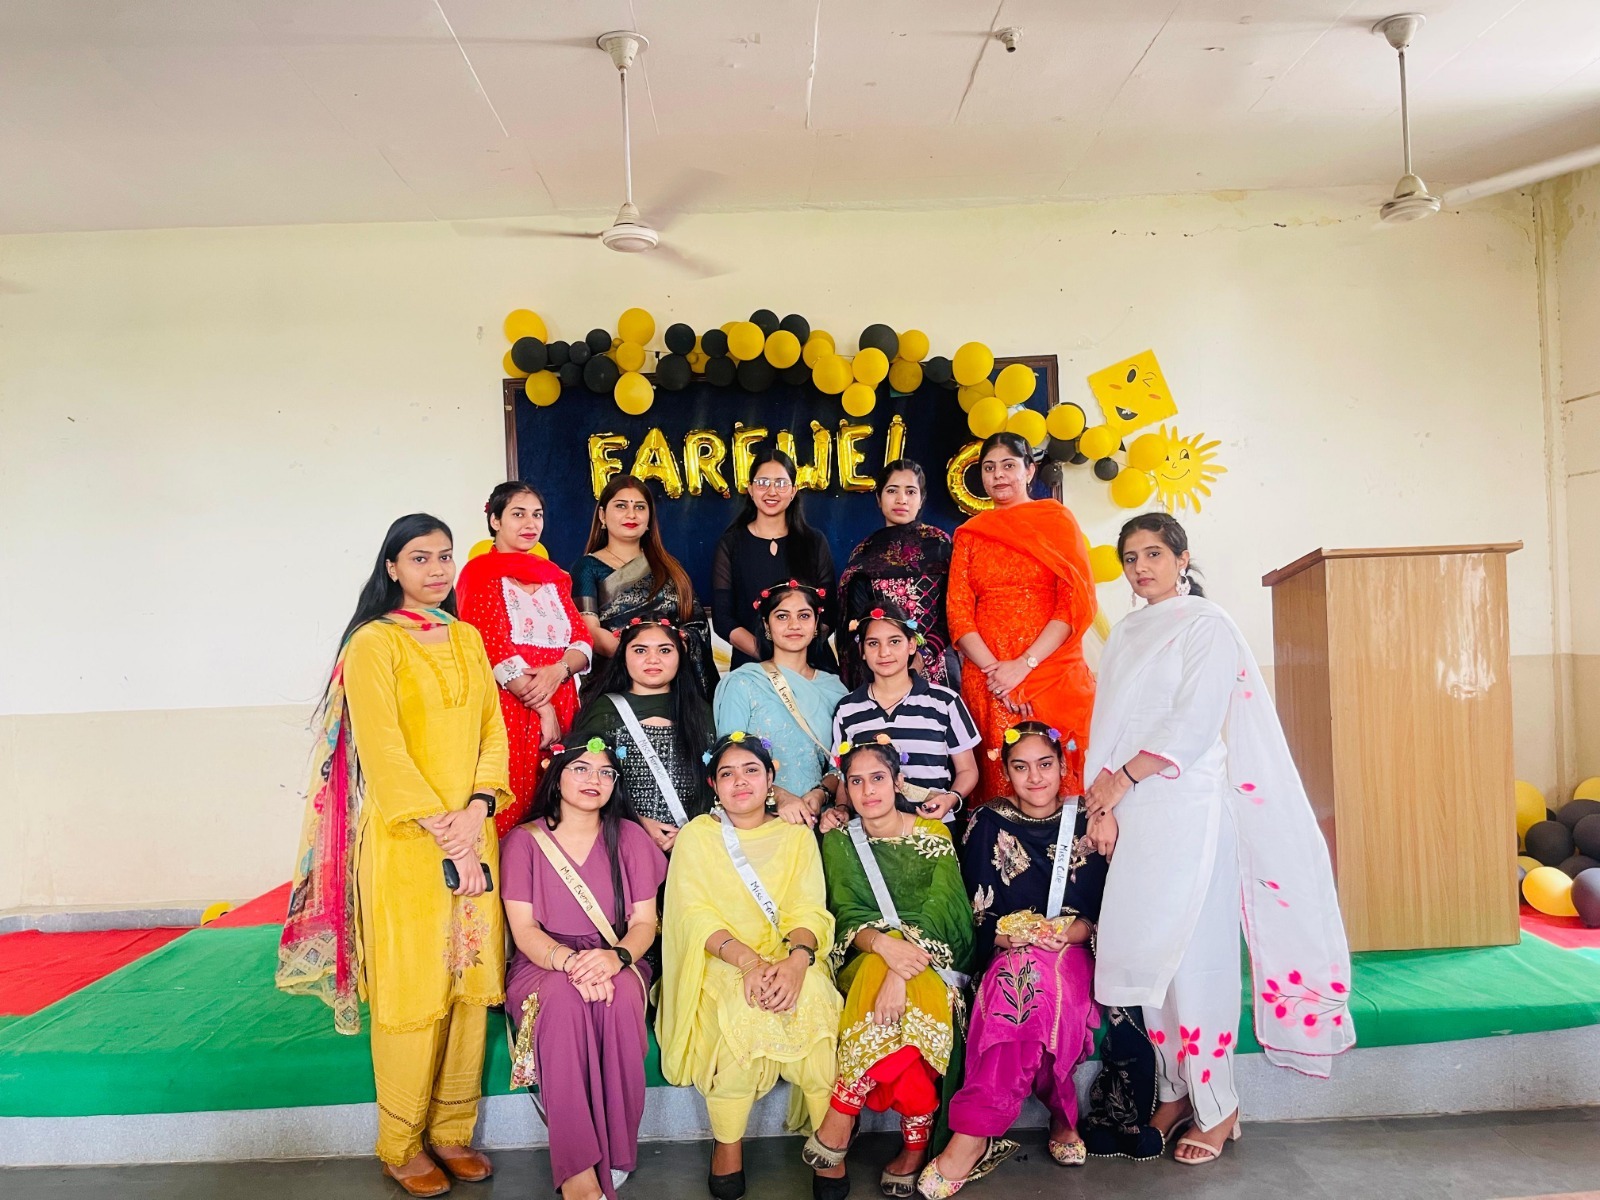 Farwell party was organized by Commerce students.